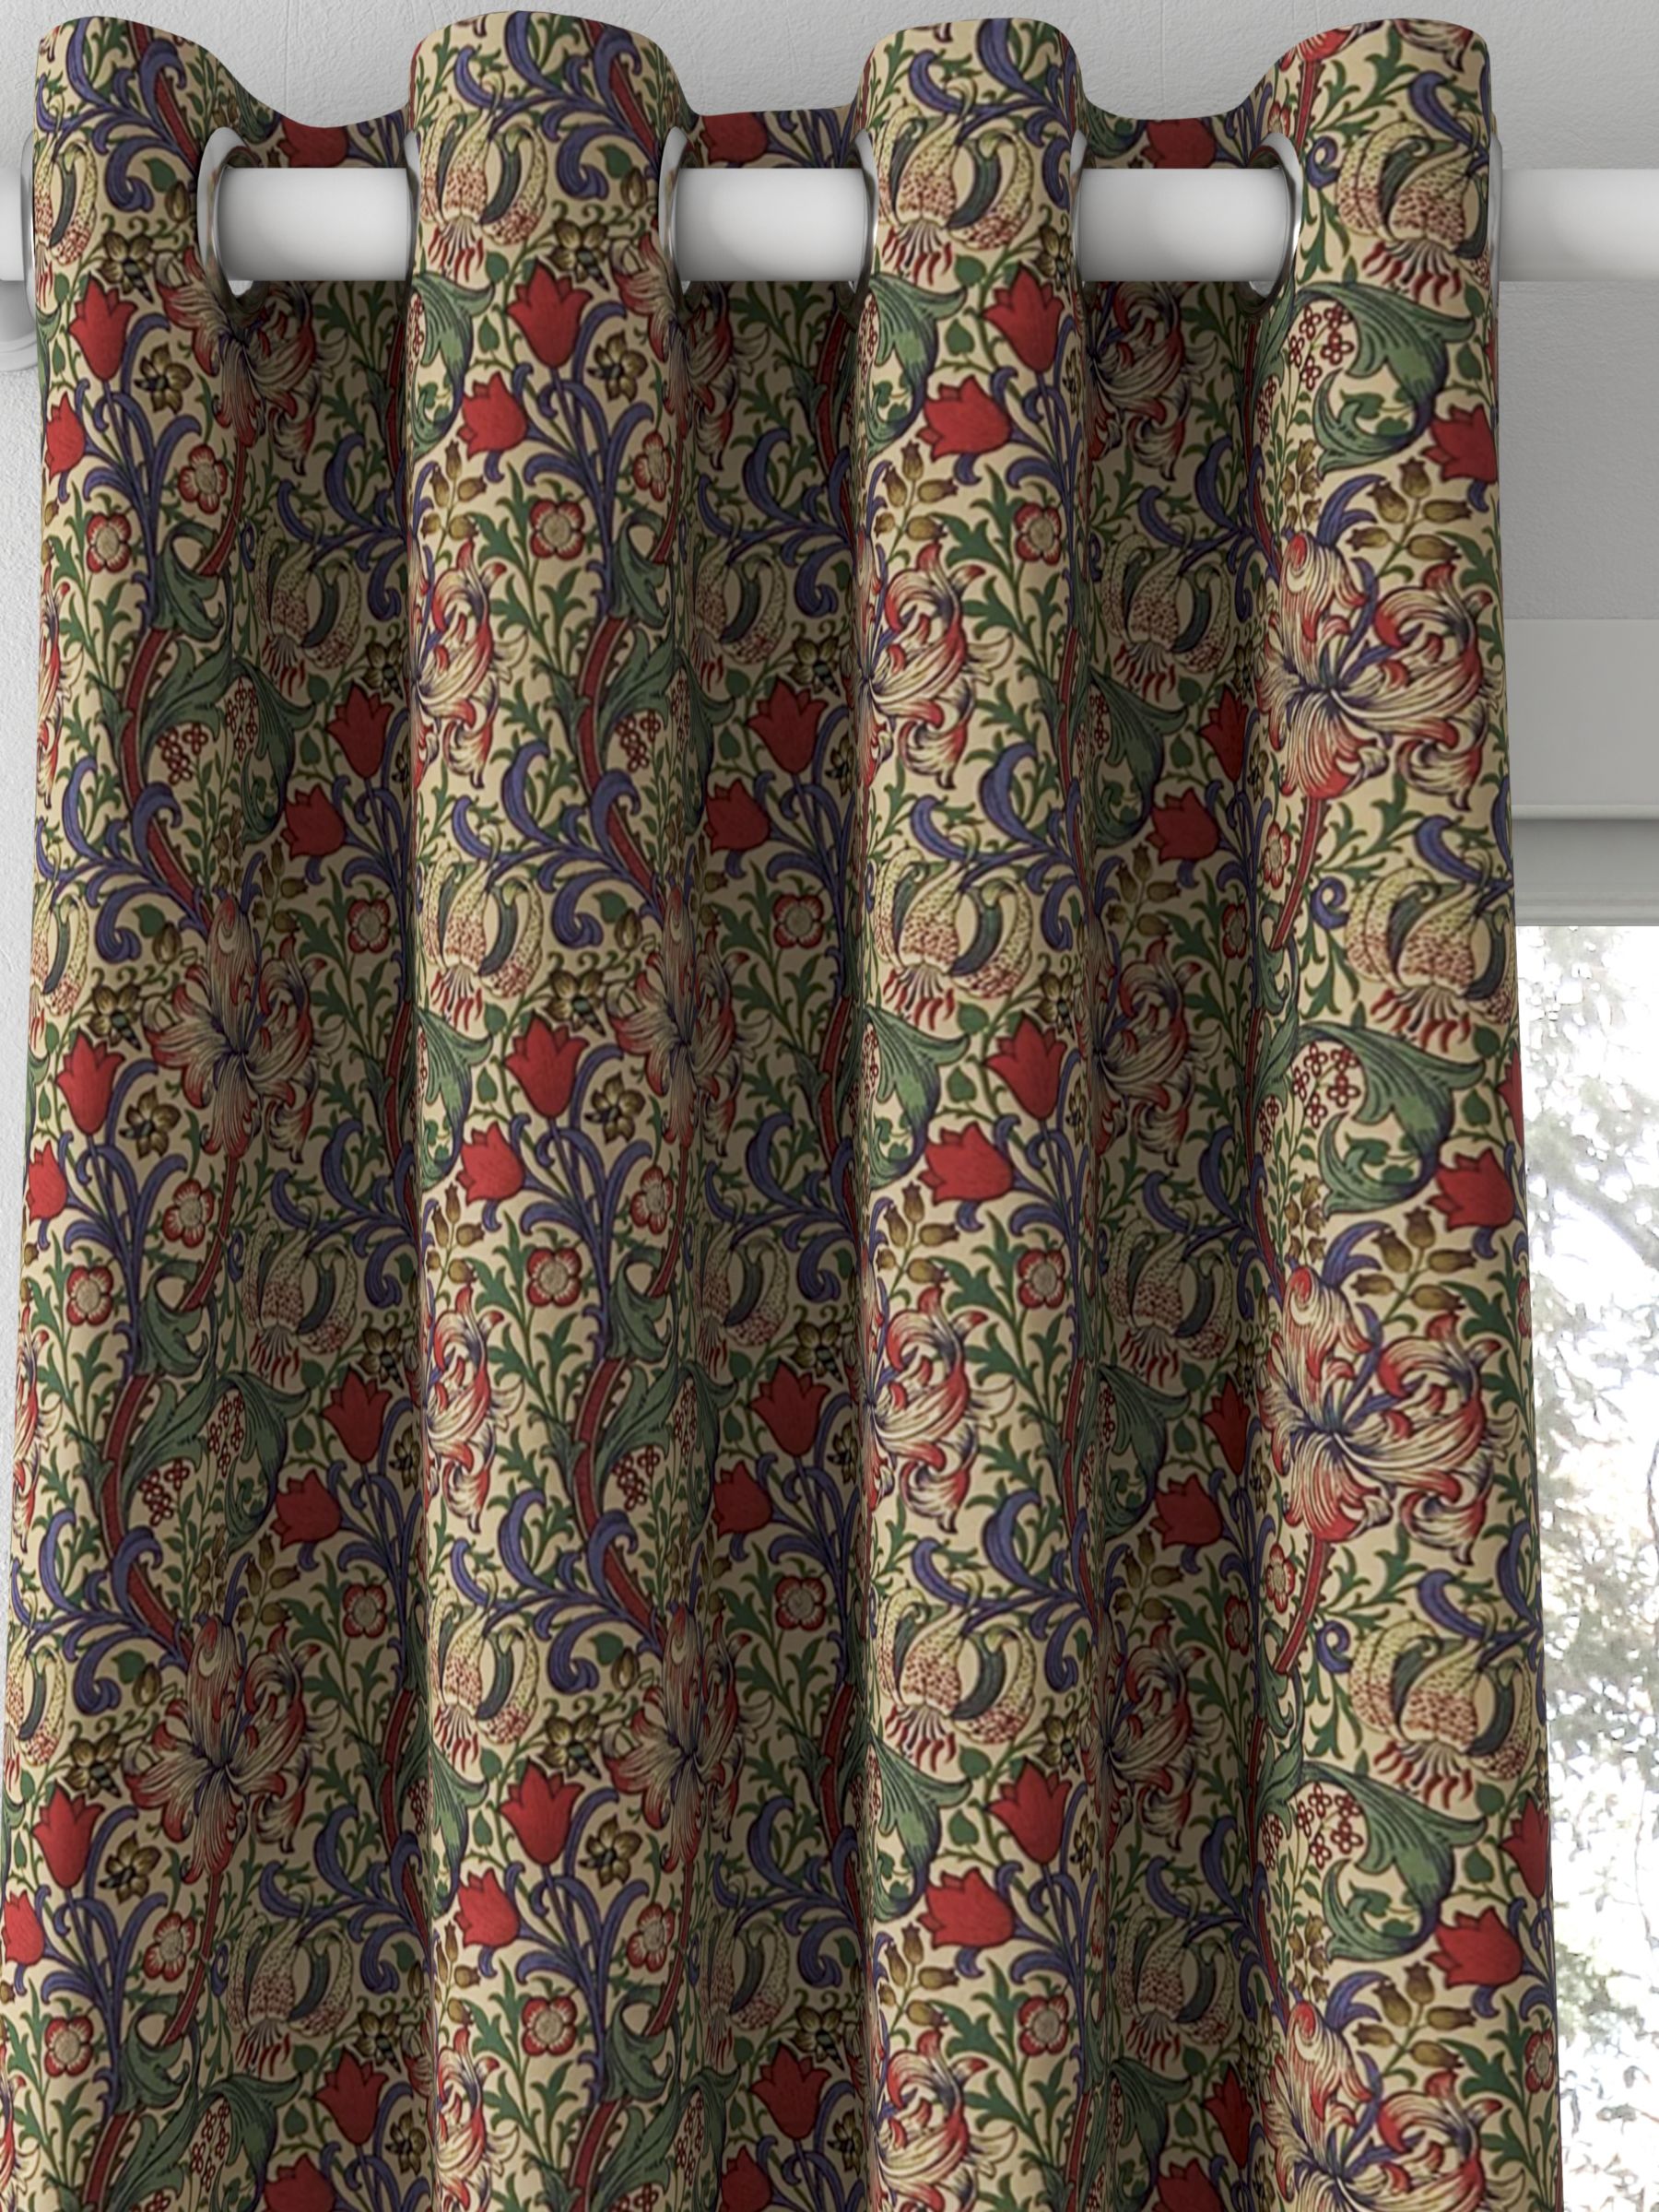 Morris & Co. Golden Lily Minor Made to Measure Curtains, Biscuit/Indigo/Red